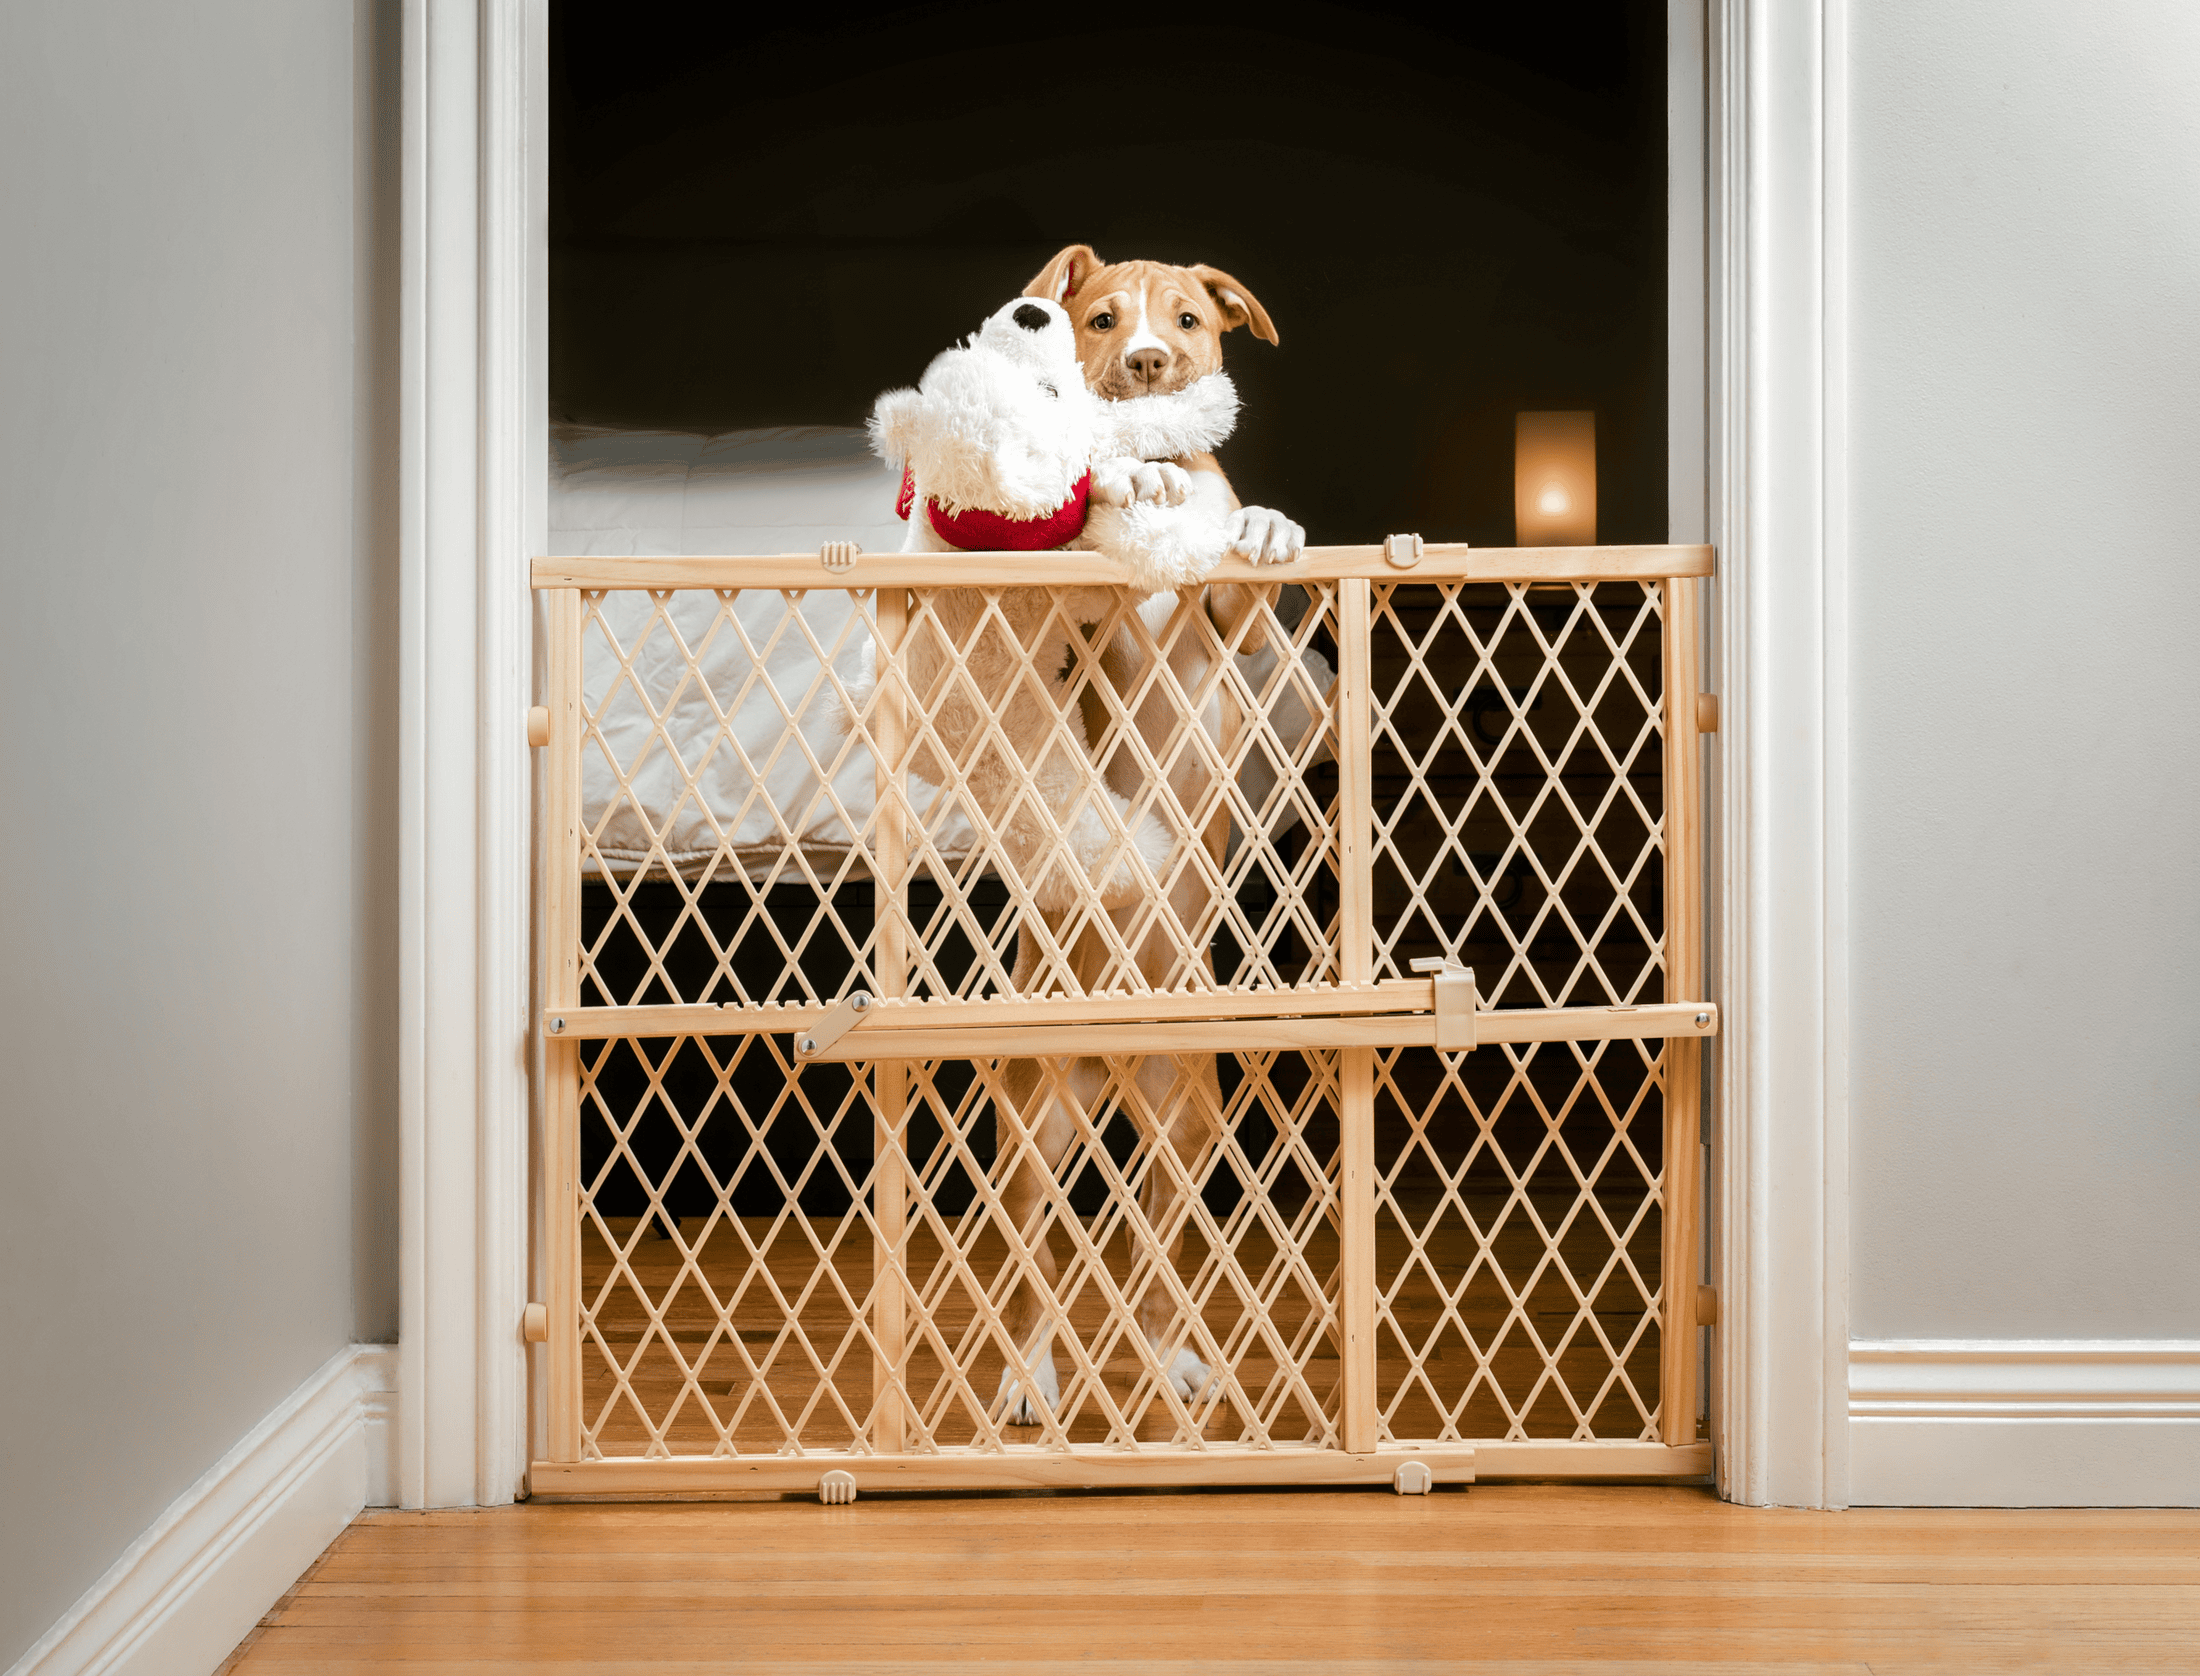 As pet parents, our dogs can feel like a human baby. It can be hard to hear their cries. I don't completely ignore a whining puppy. Instead, I stay near their crate door.